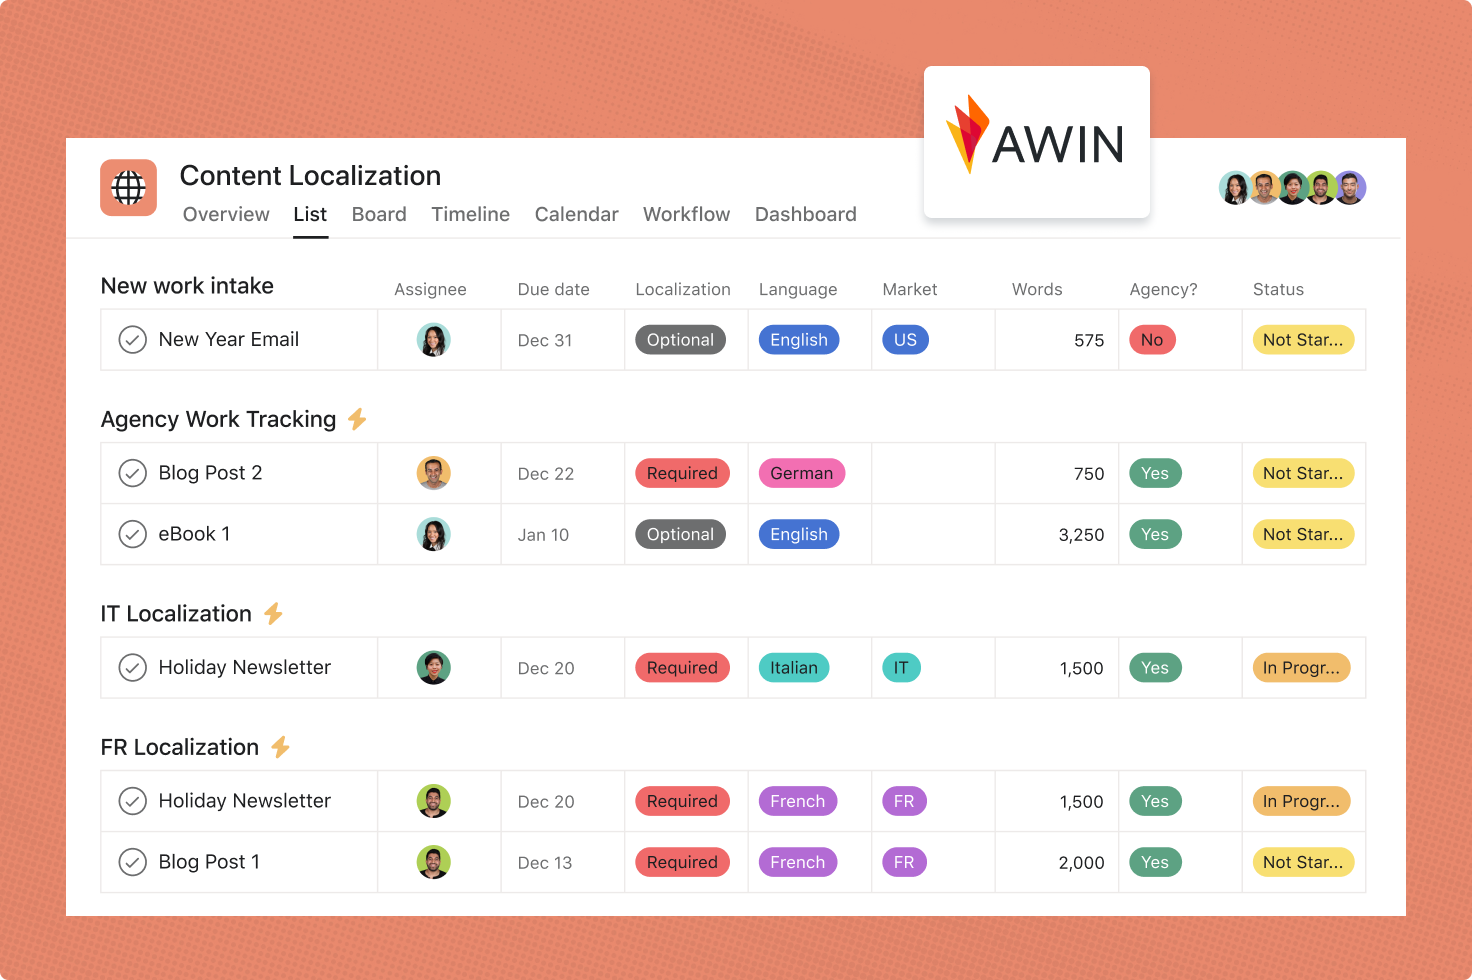 Awin uses Asana for their automated localization workflow